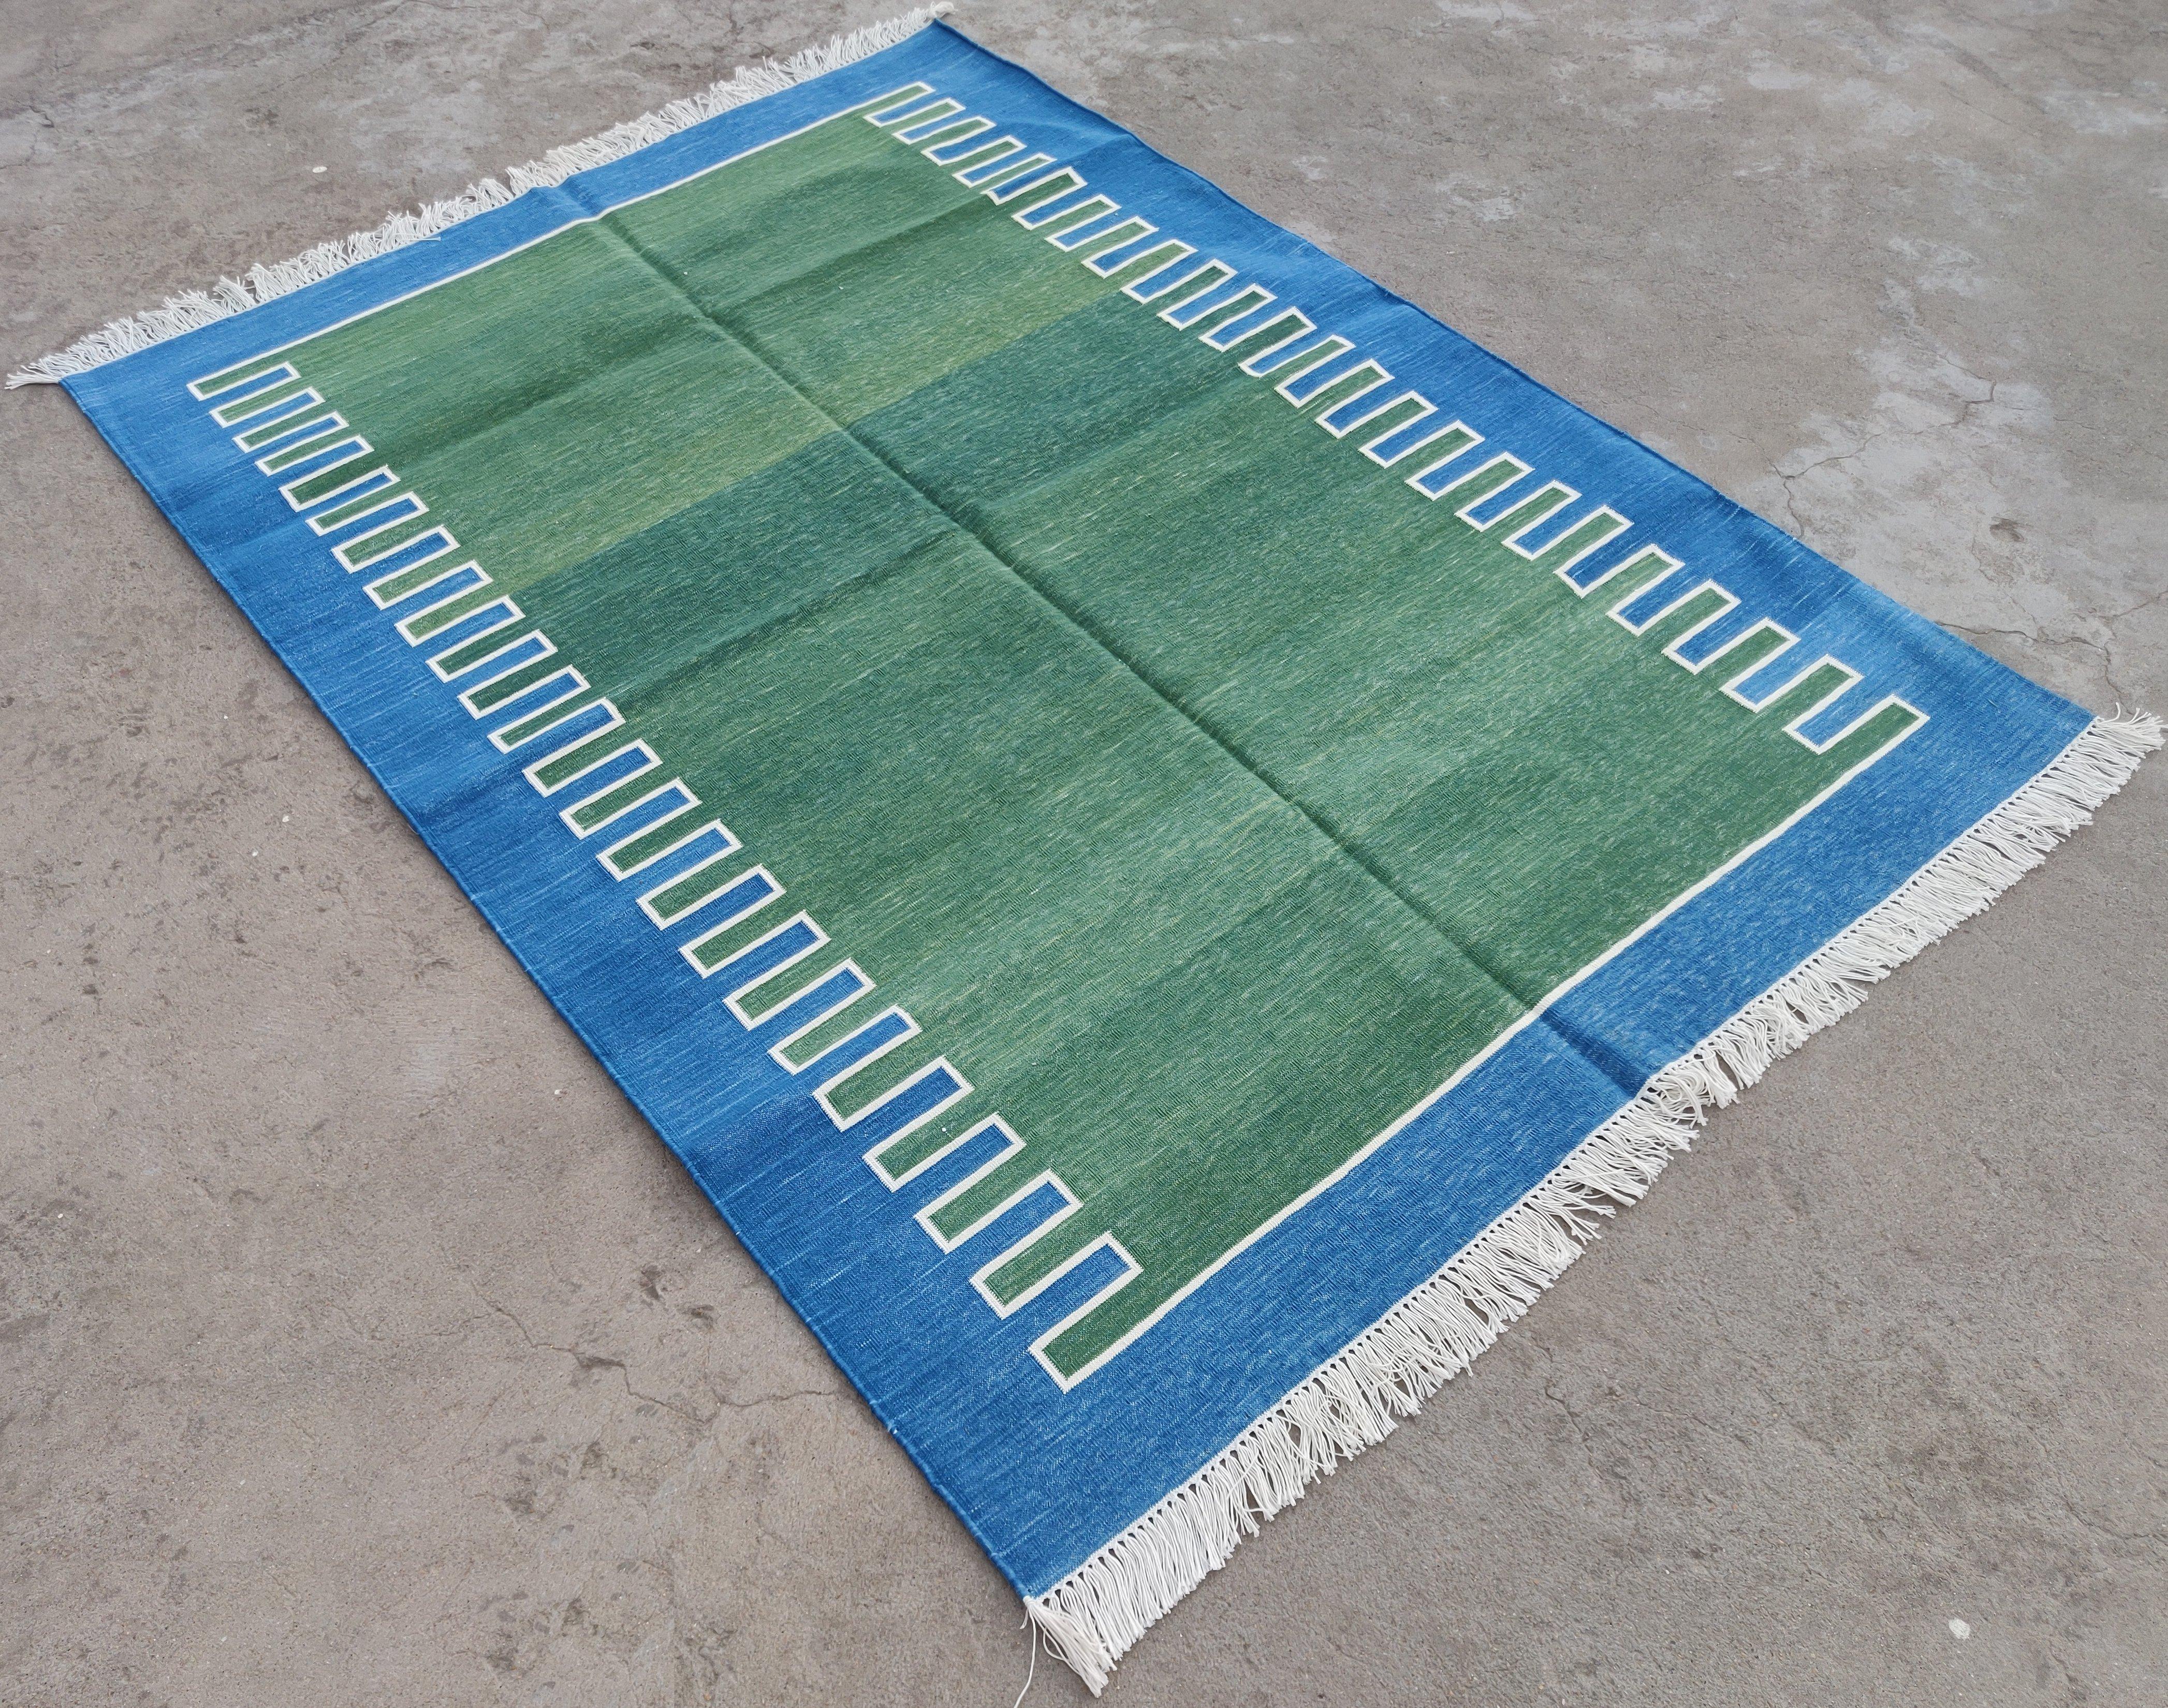 Cotton Vegetable Dyed Forest Green, Cream And Blue Zig Zag Striped Indian Dhurrie Rug-4'x6' 
These special flat-weave dhurries are hand-woven with 15 ply 100% cotton yarn. Due to the special manufacturing techniques used to create our rugs, the size